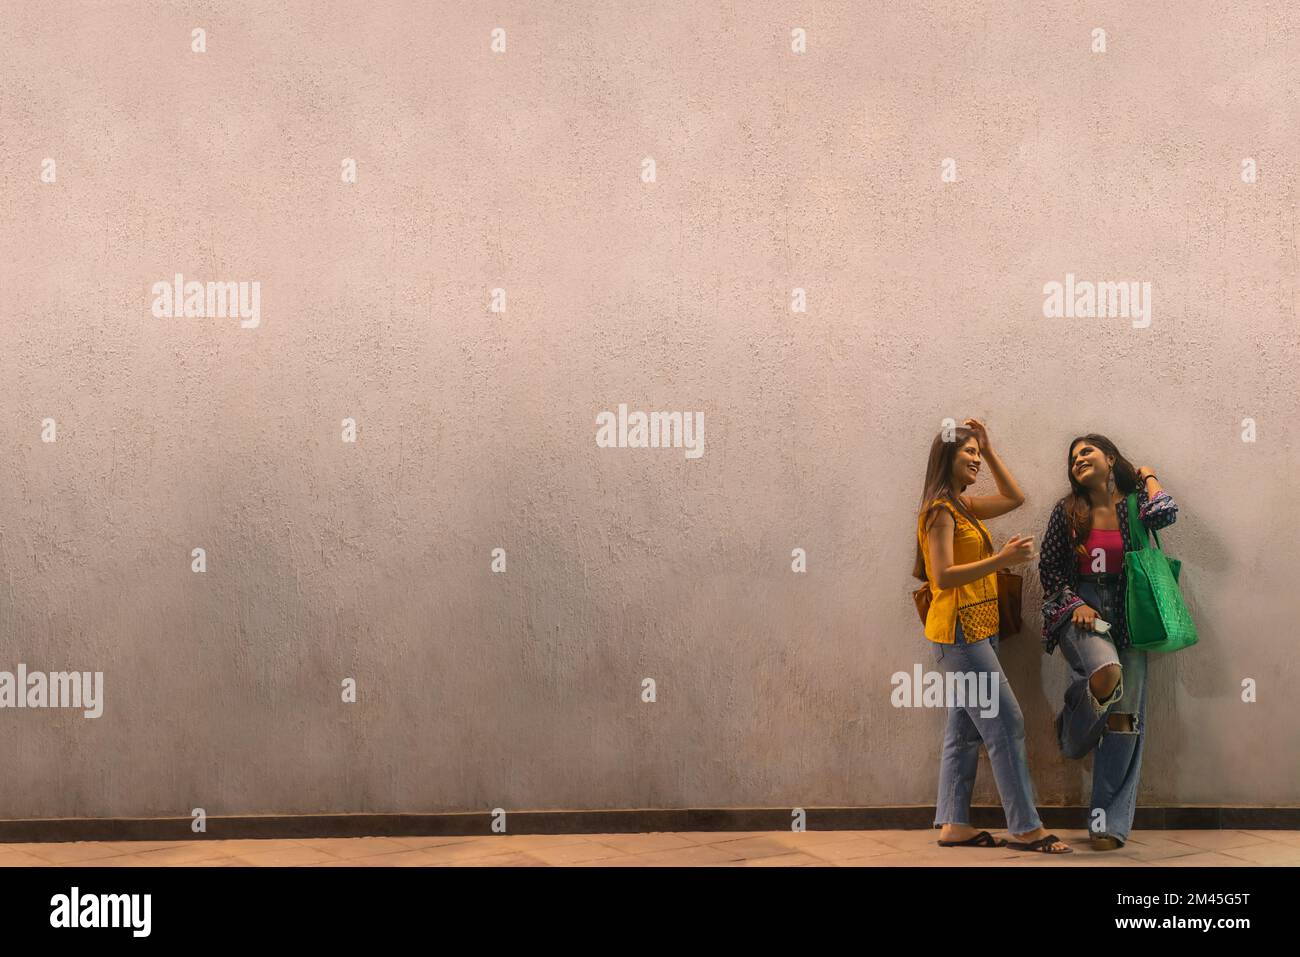 Long distance shot of two Indian woman with bags standing together against wall Stock Photo